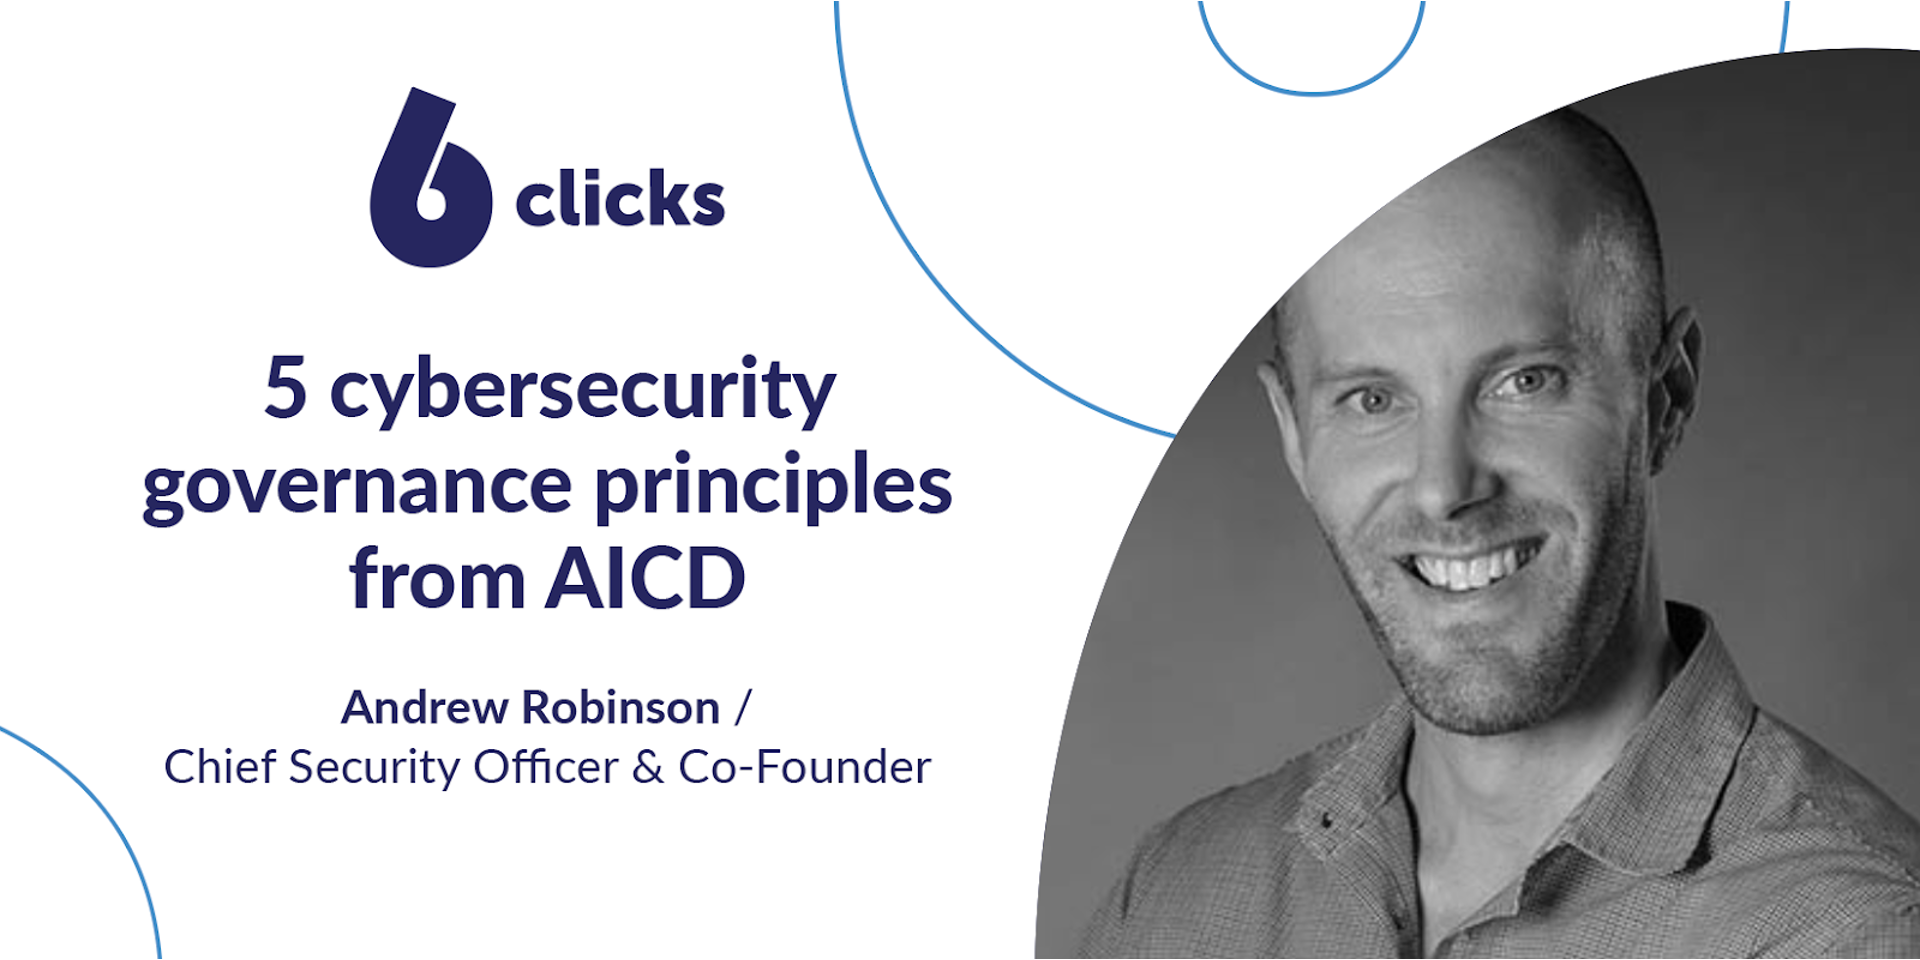 5 cyber security governance principles from AICD by Andrew Robinson (6clicks)